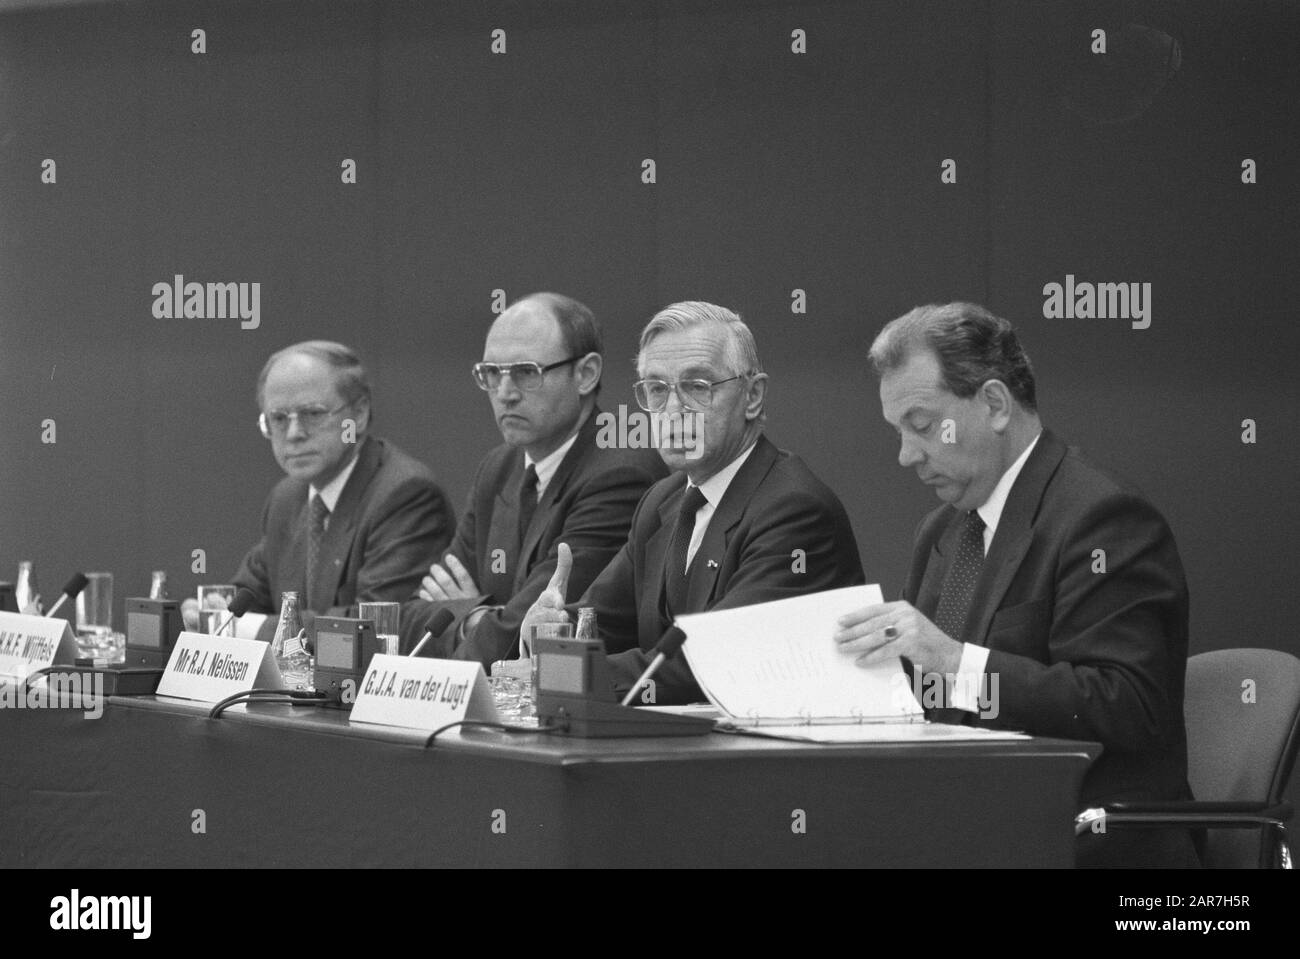 Press conference College of Consultations of the Joint Banks Date: 29 November 1988 Keywords: press conferences Personal name: Amro, Rabobank van de Lugt Institution name: Postbank  : Croes, Rob C./Anefo Stock Photo